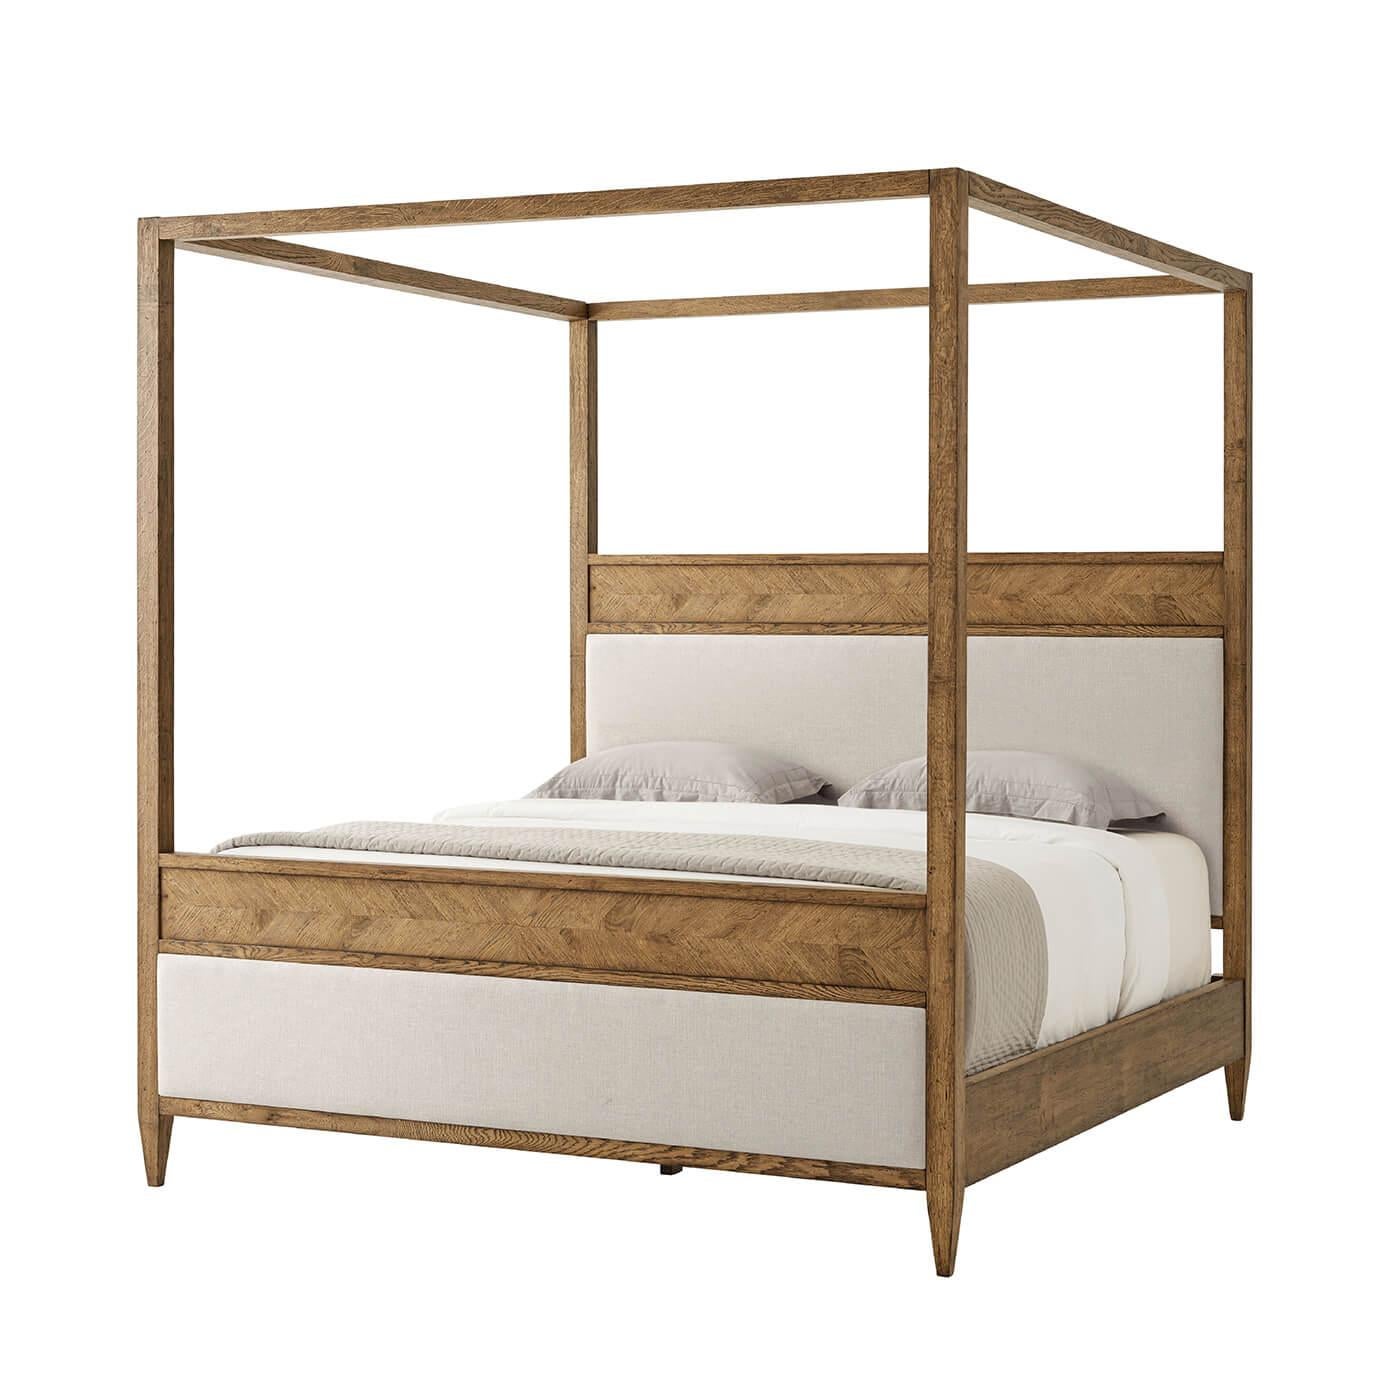 A rustic oak canopy California king bed in Dawn finish. This beautiful bed has hand-carved oak solids and mirrored herringbone marquetry with an upholstered panel on the headboard and footboard. It rests on finely tapered oak legs. 
Shown in Dawn